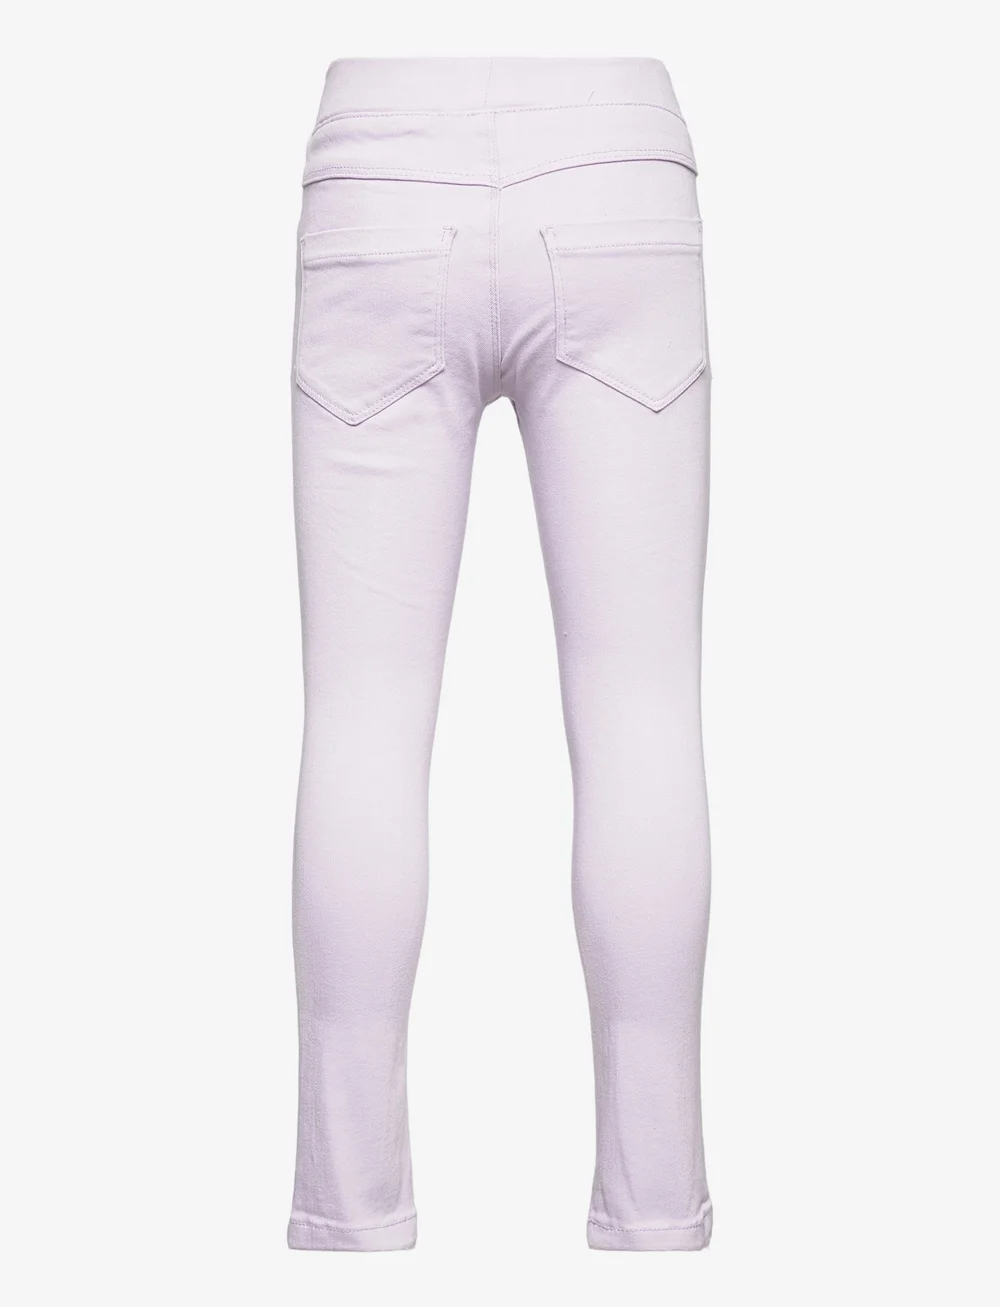 The New Vigga Colored Jeggings - Bottoms 